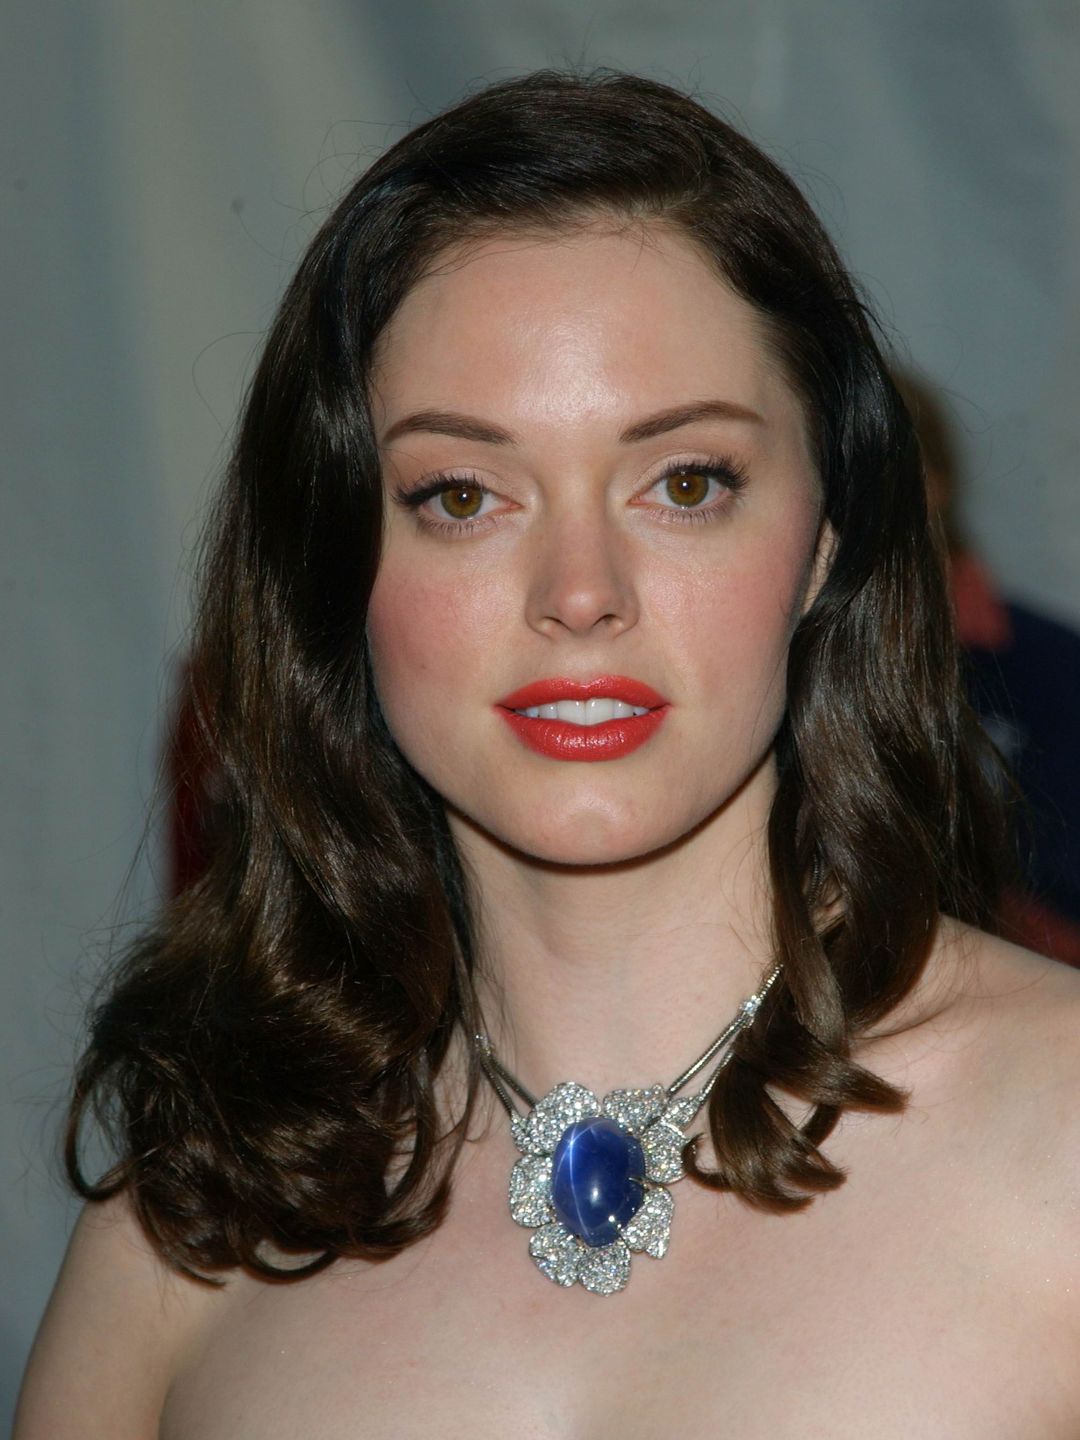 Rose McGowan young age